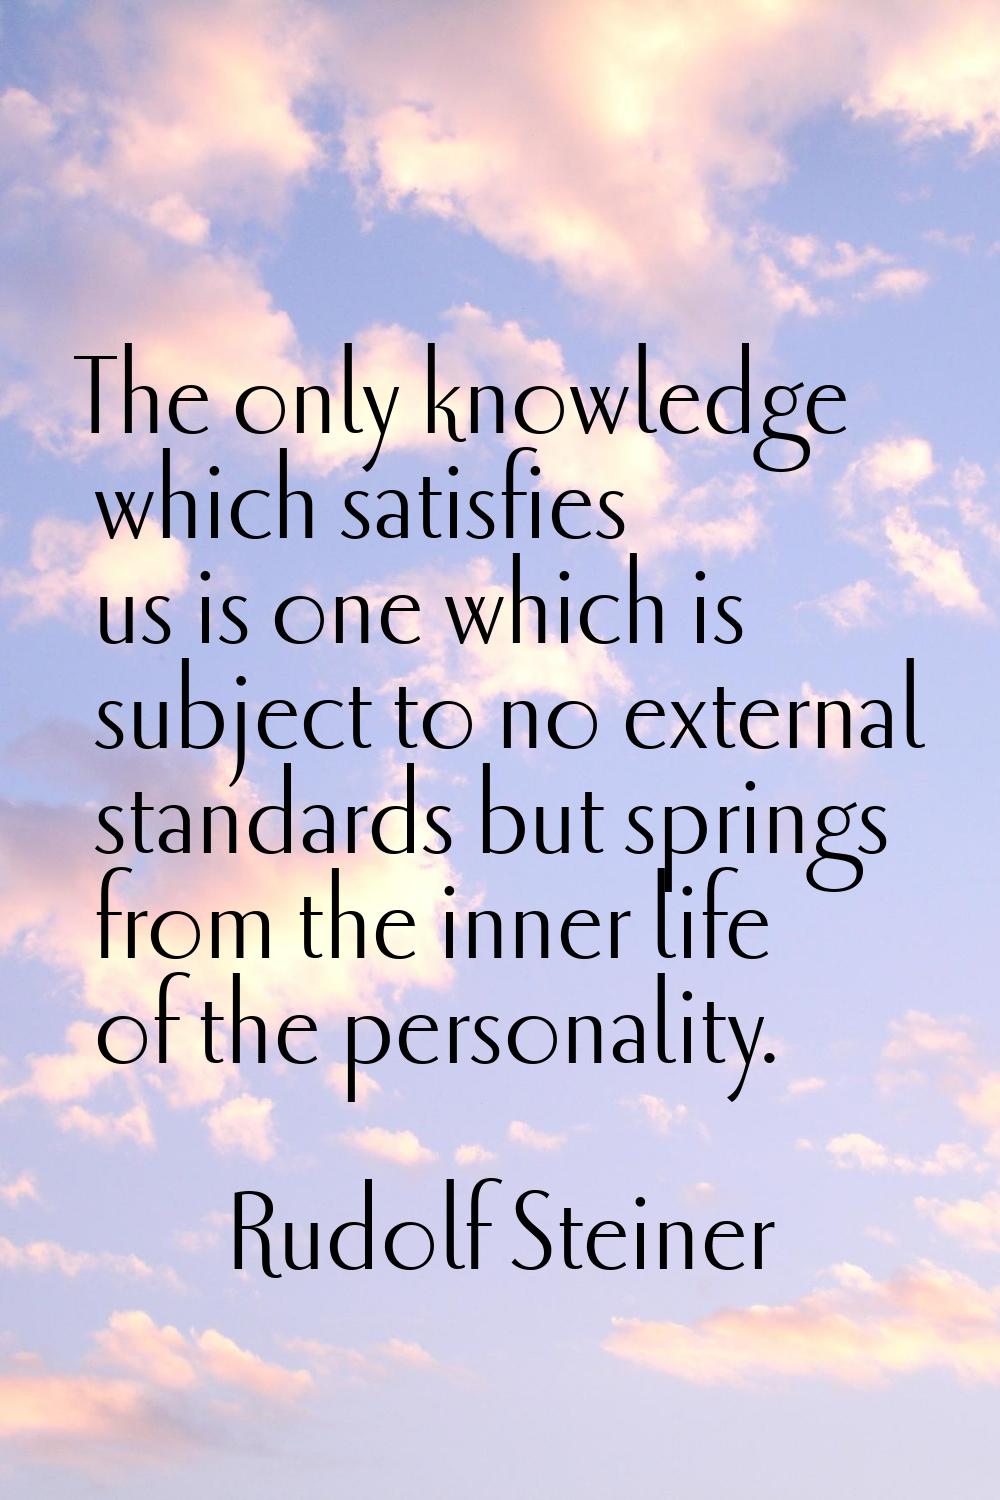 The only knowledge which satisfies us is one which is subject to no external standards but springs 